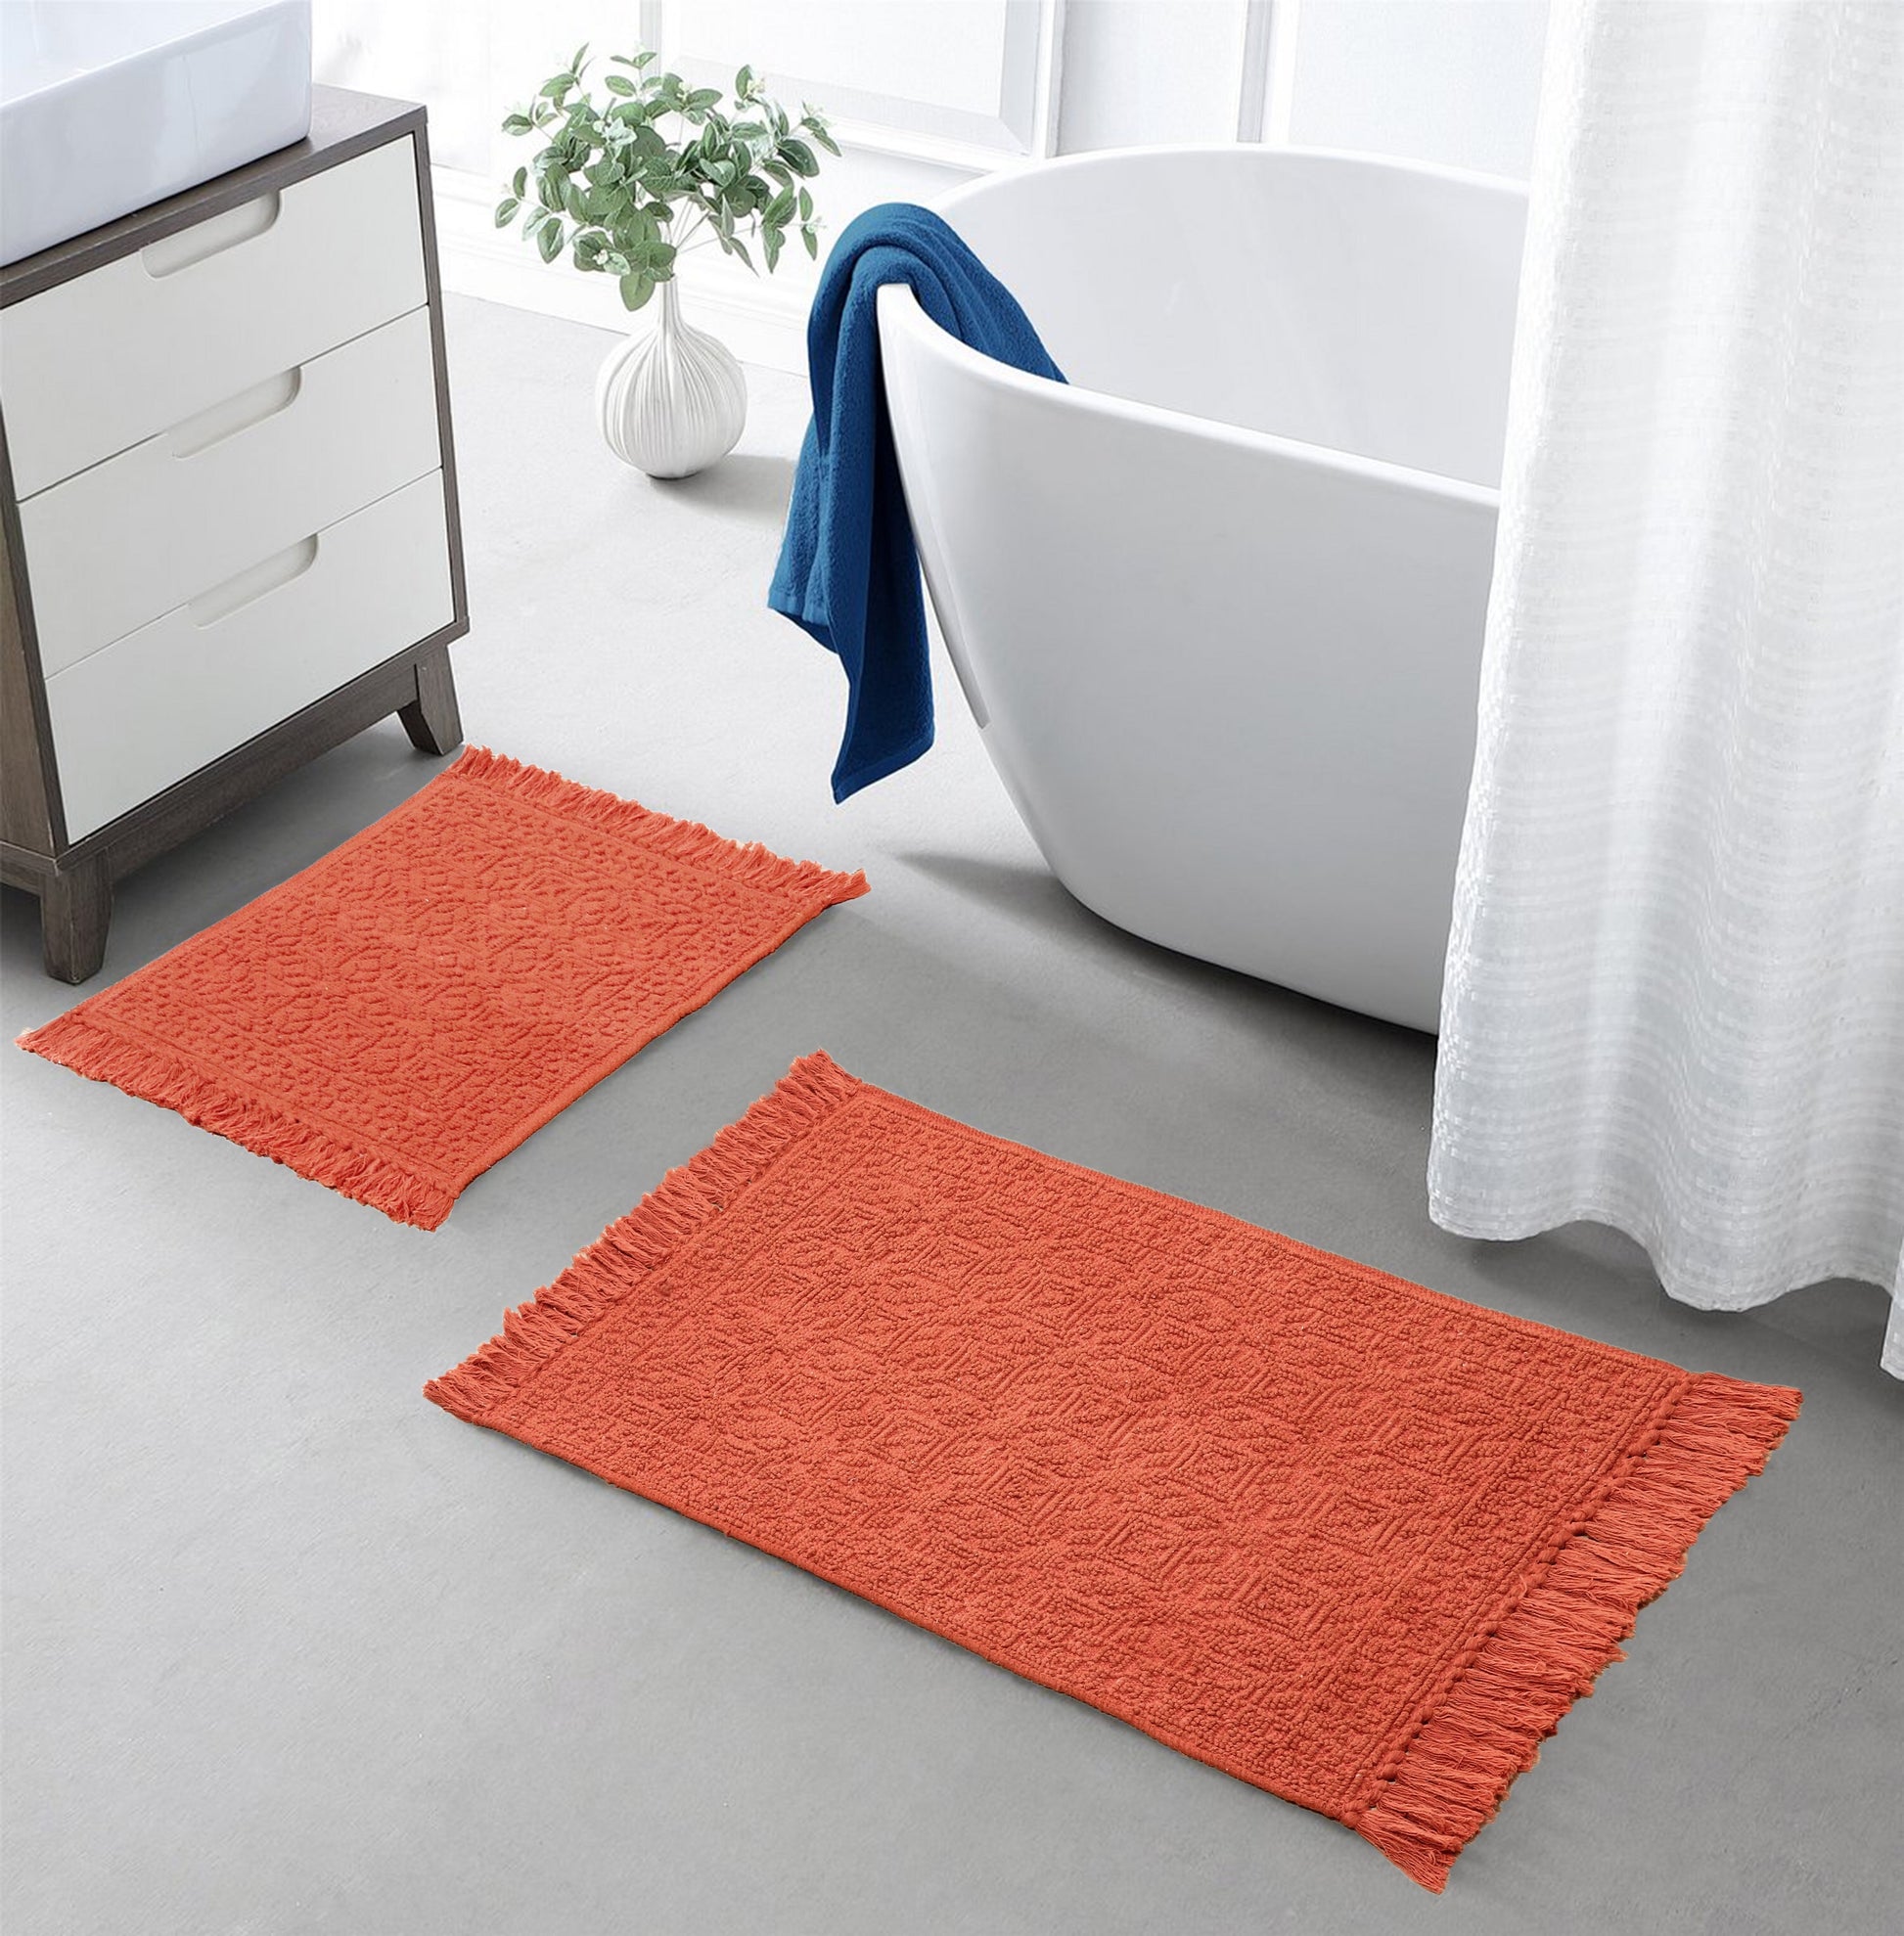 100% cotton hand woven water absorbent bathroom rugs (set of 2) - TreeWool Bathrugs#color_rust